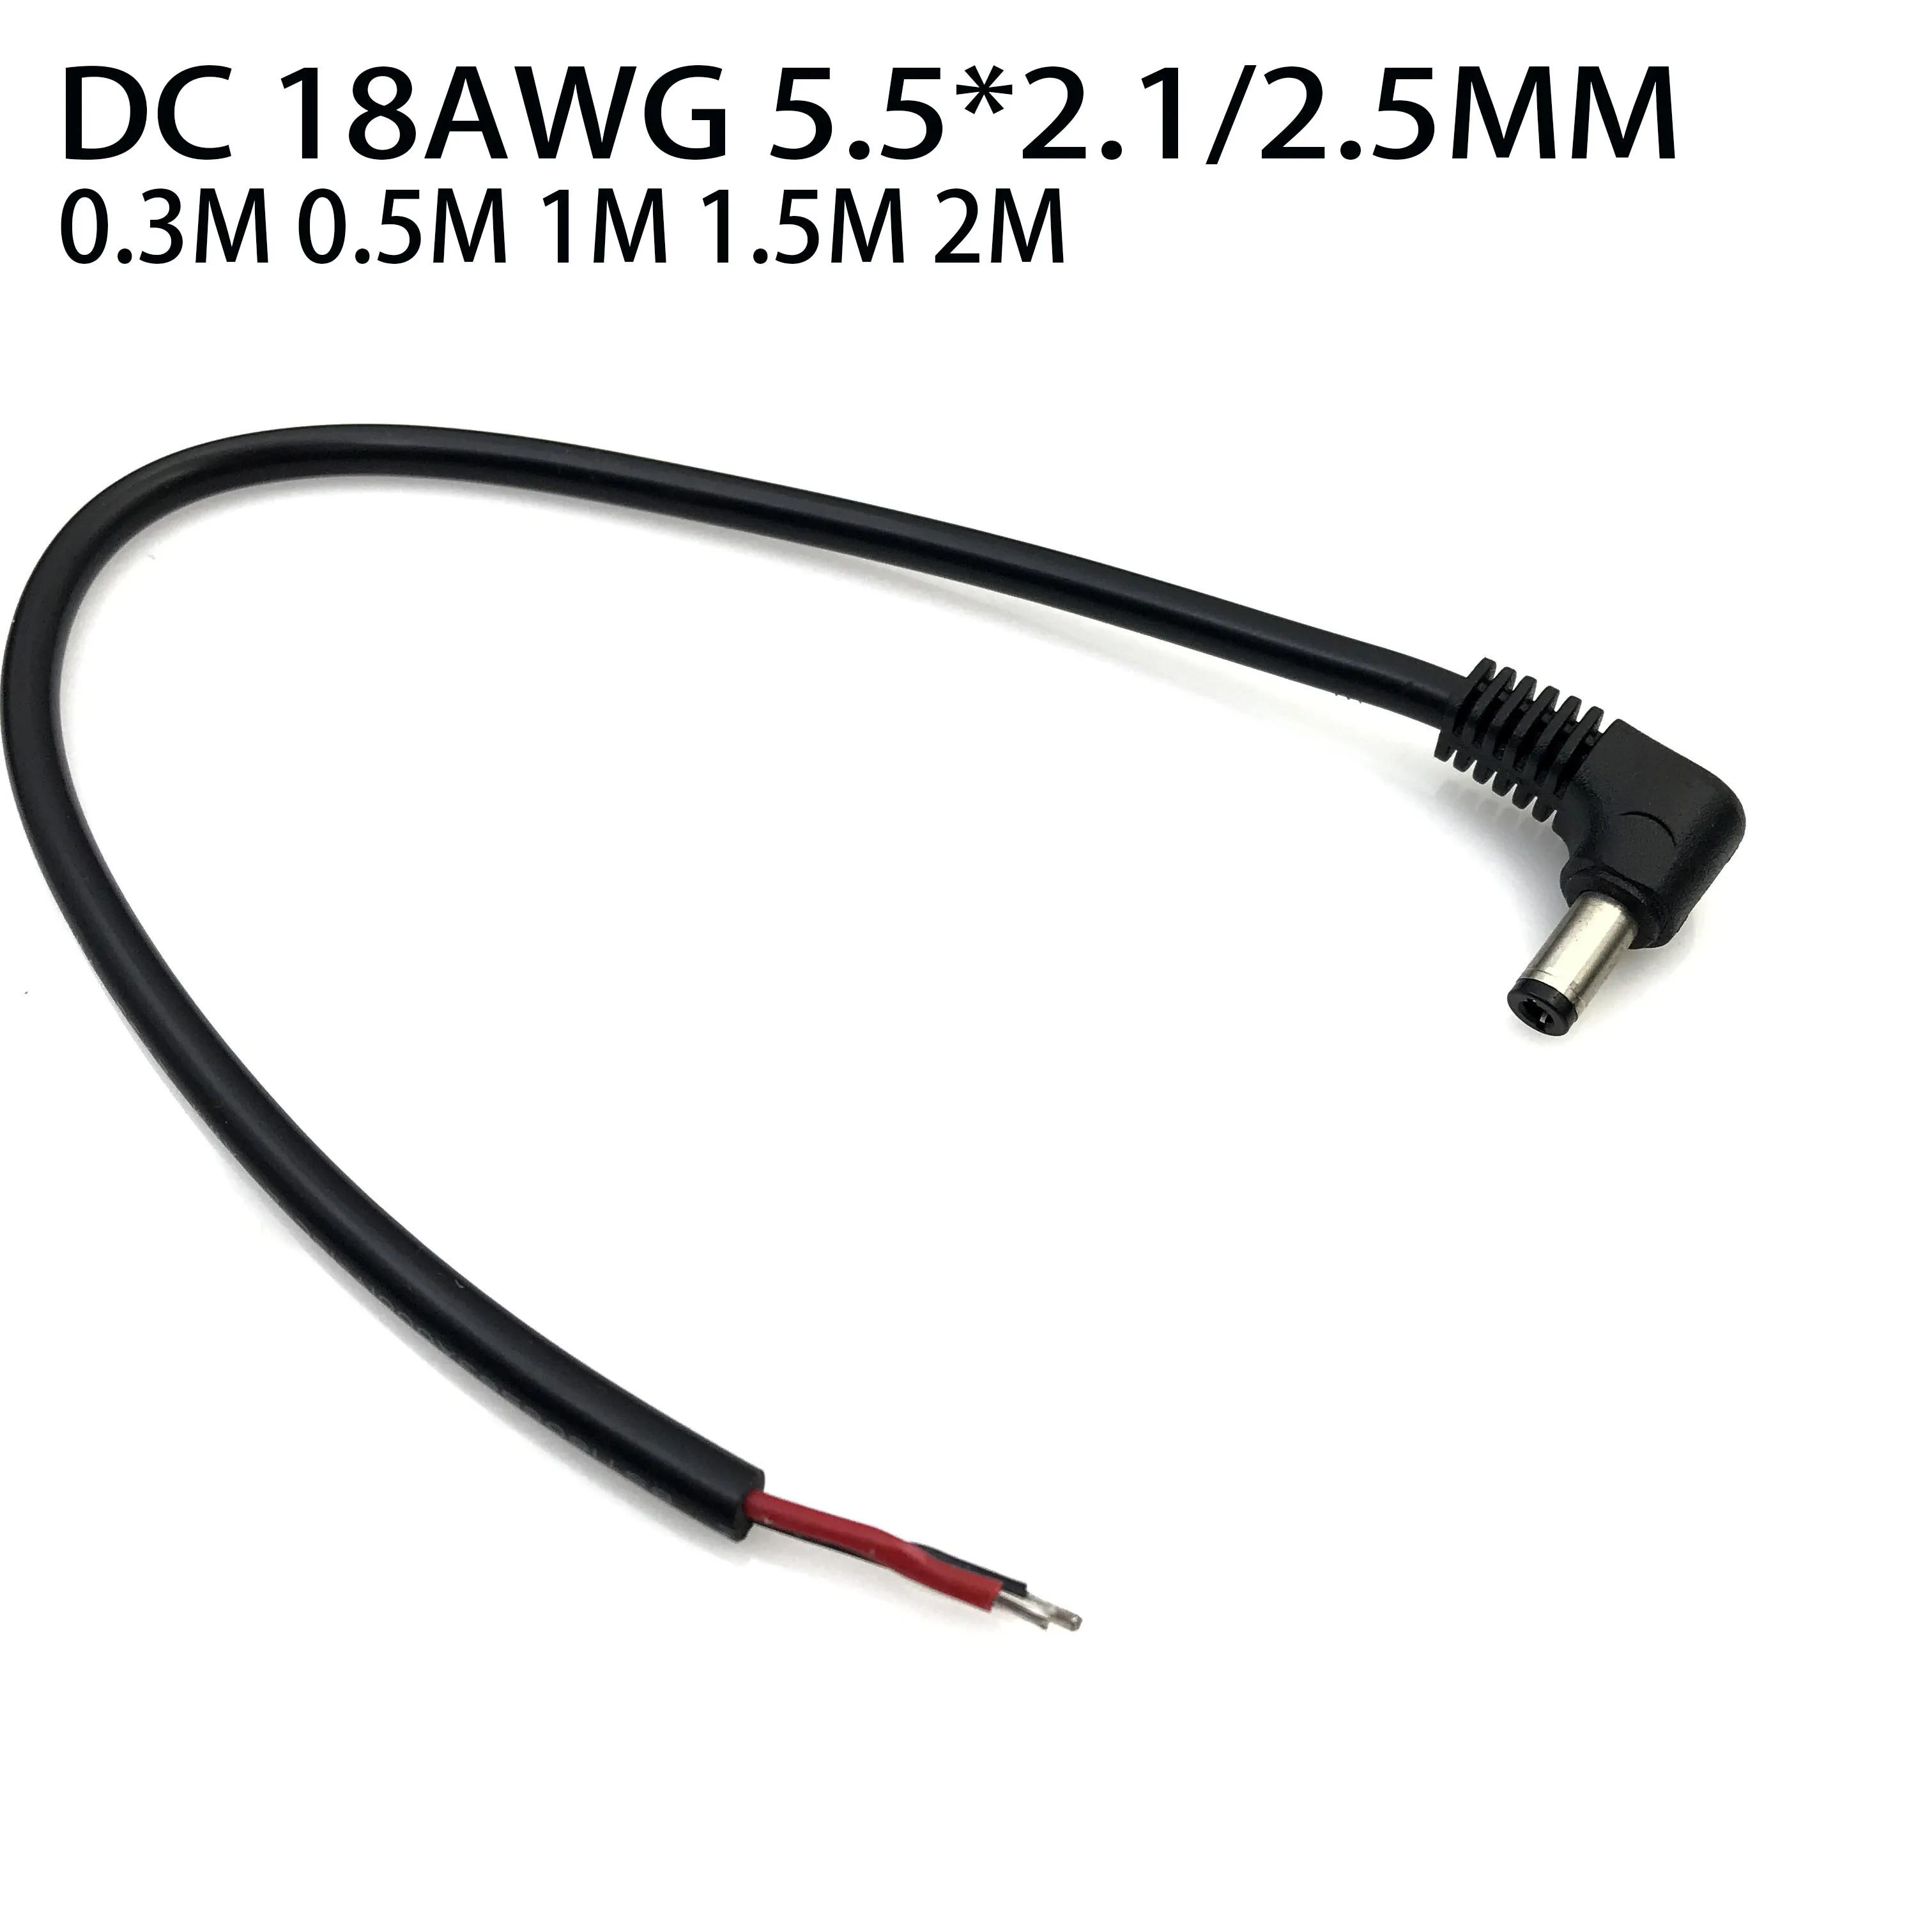 

18AWG 90 Degree Double Elbow DC Power 5.5 x 2.1mm / 2.5mm Male Plug T o single Cable Right Angled 10A high power 0.3M 0.5m 1m